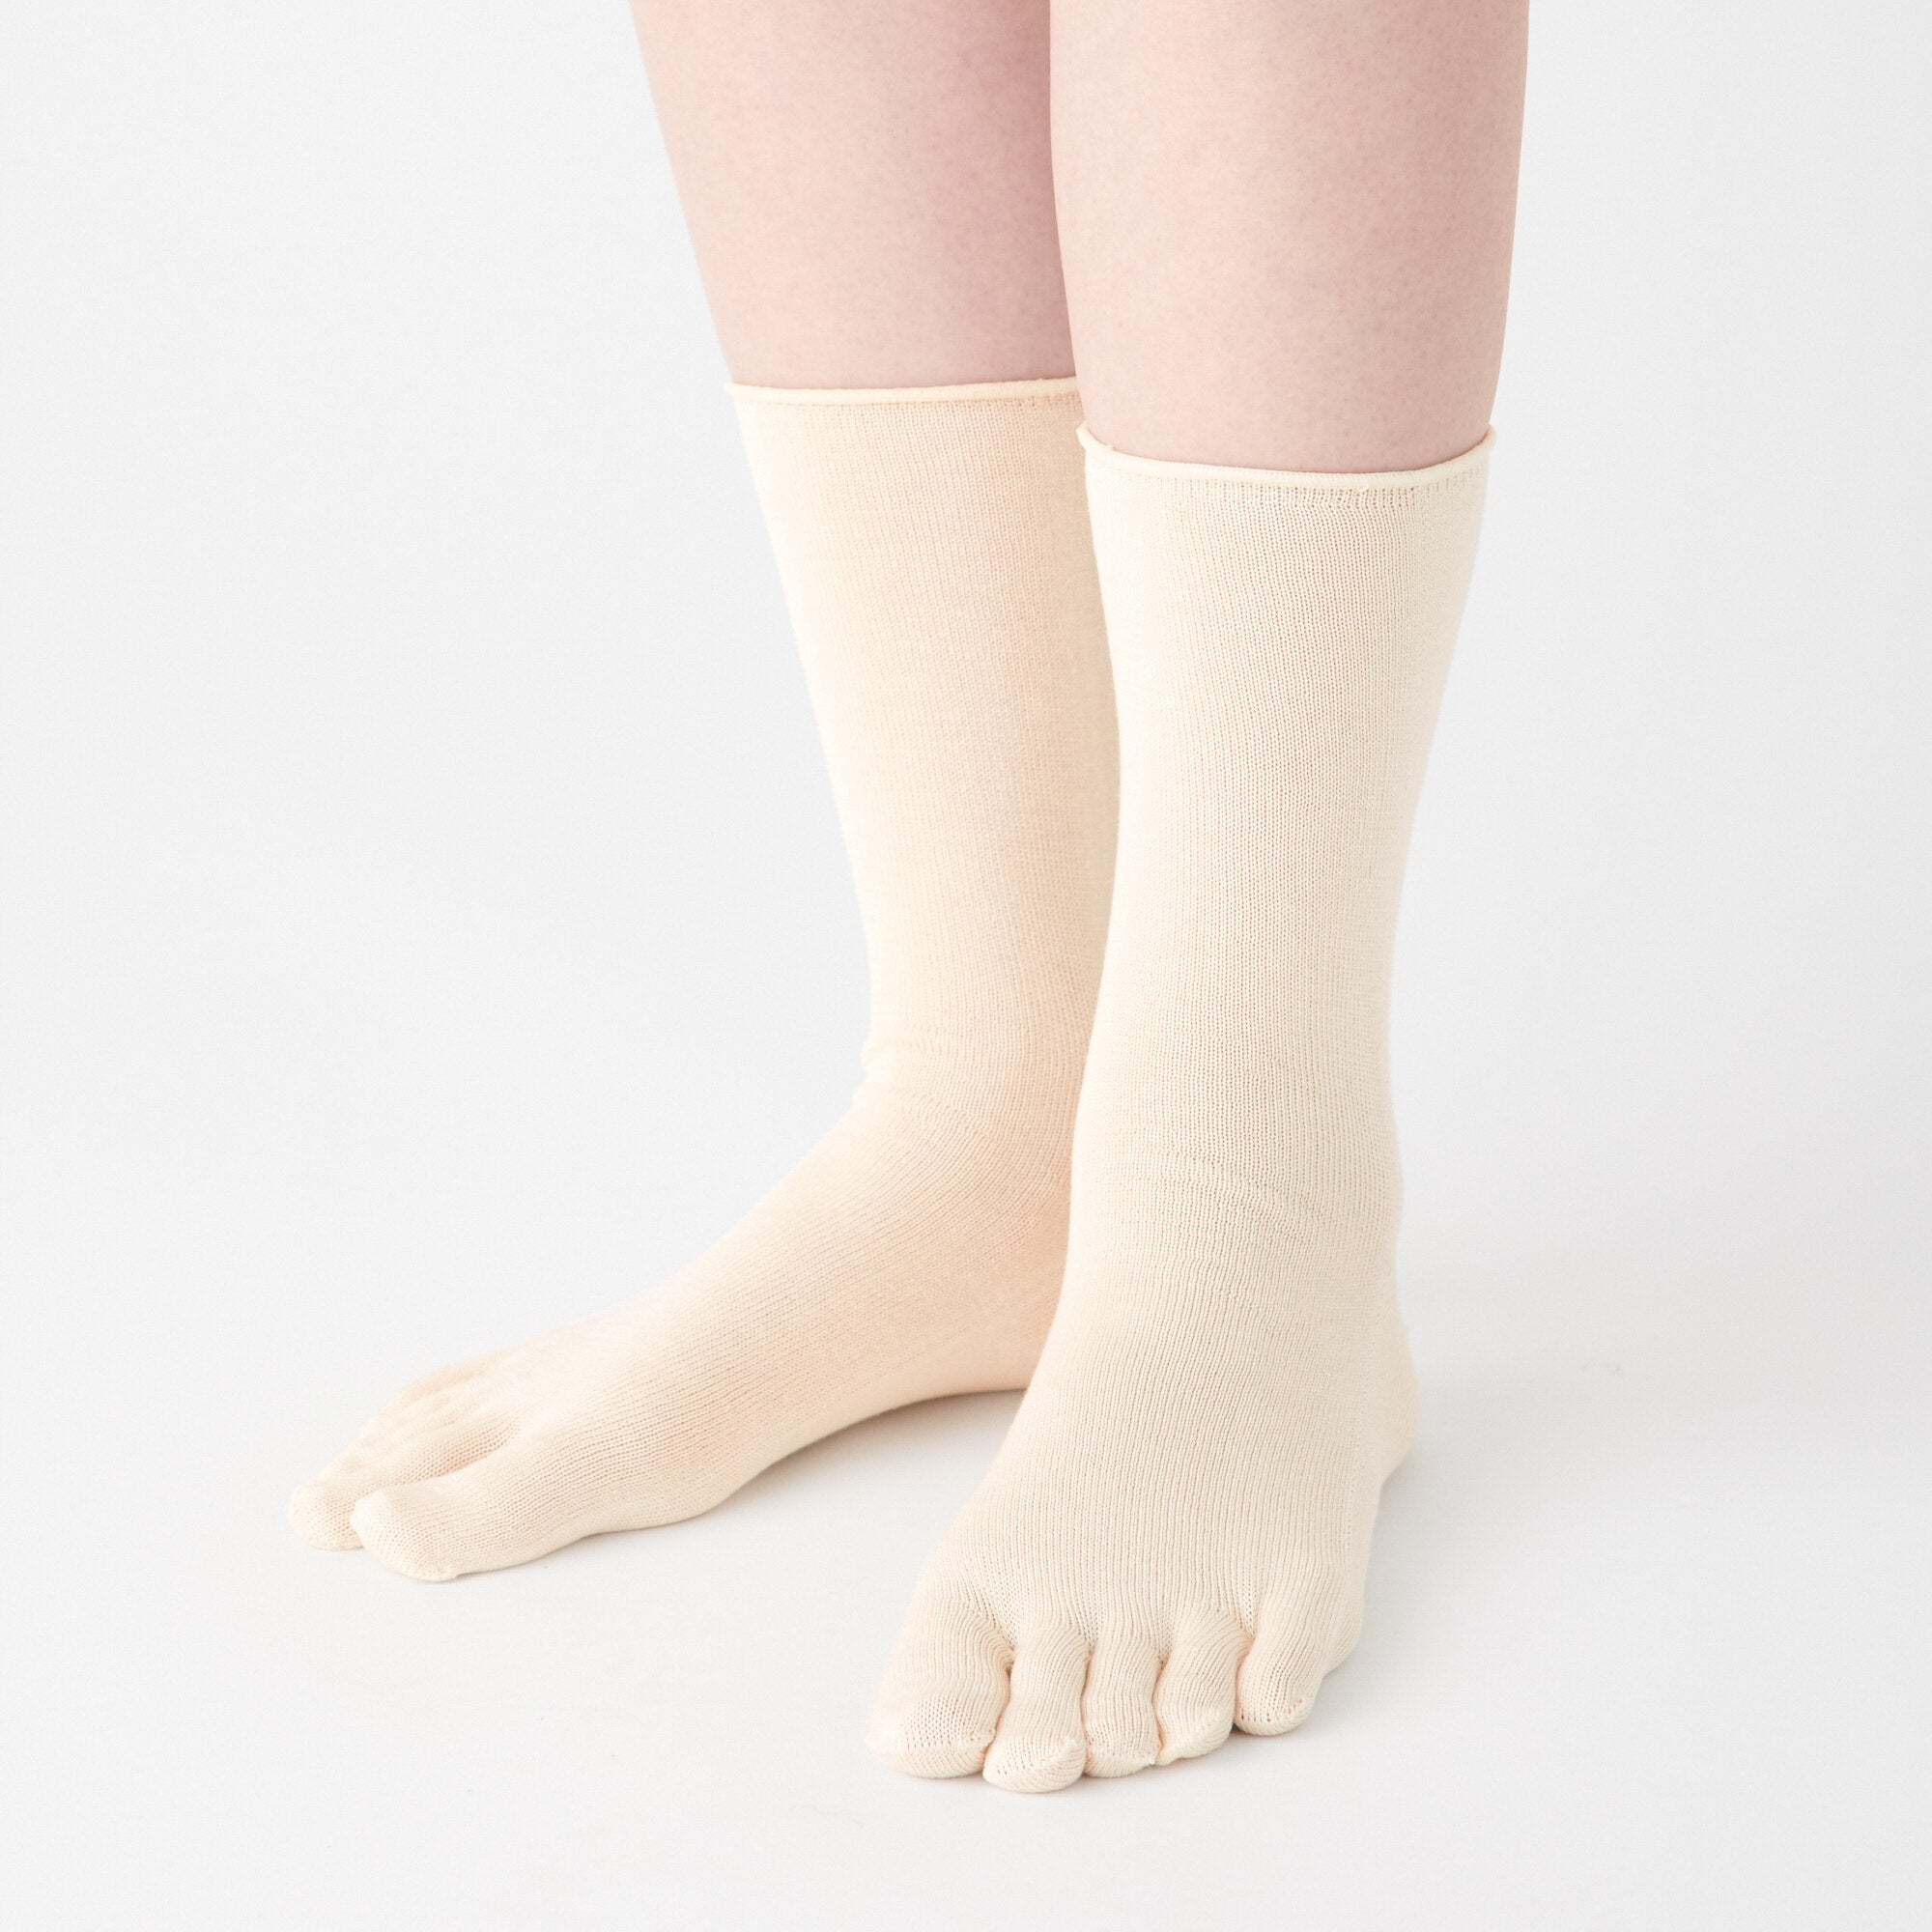 Right Angle Silk Blend 5-Toe Socks One Size